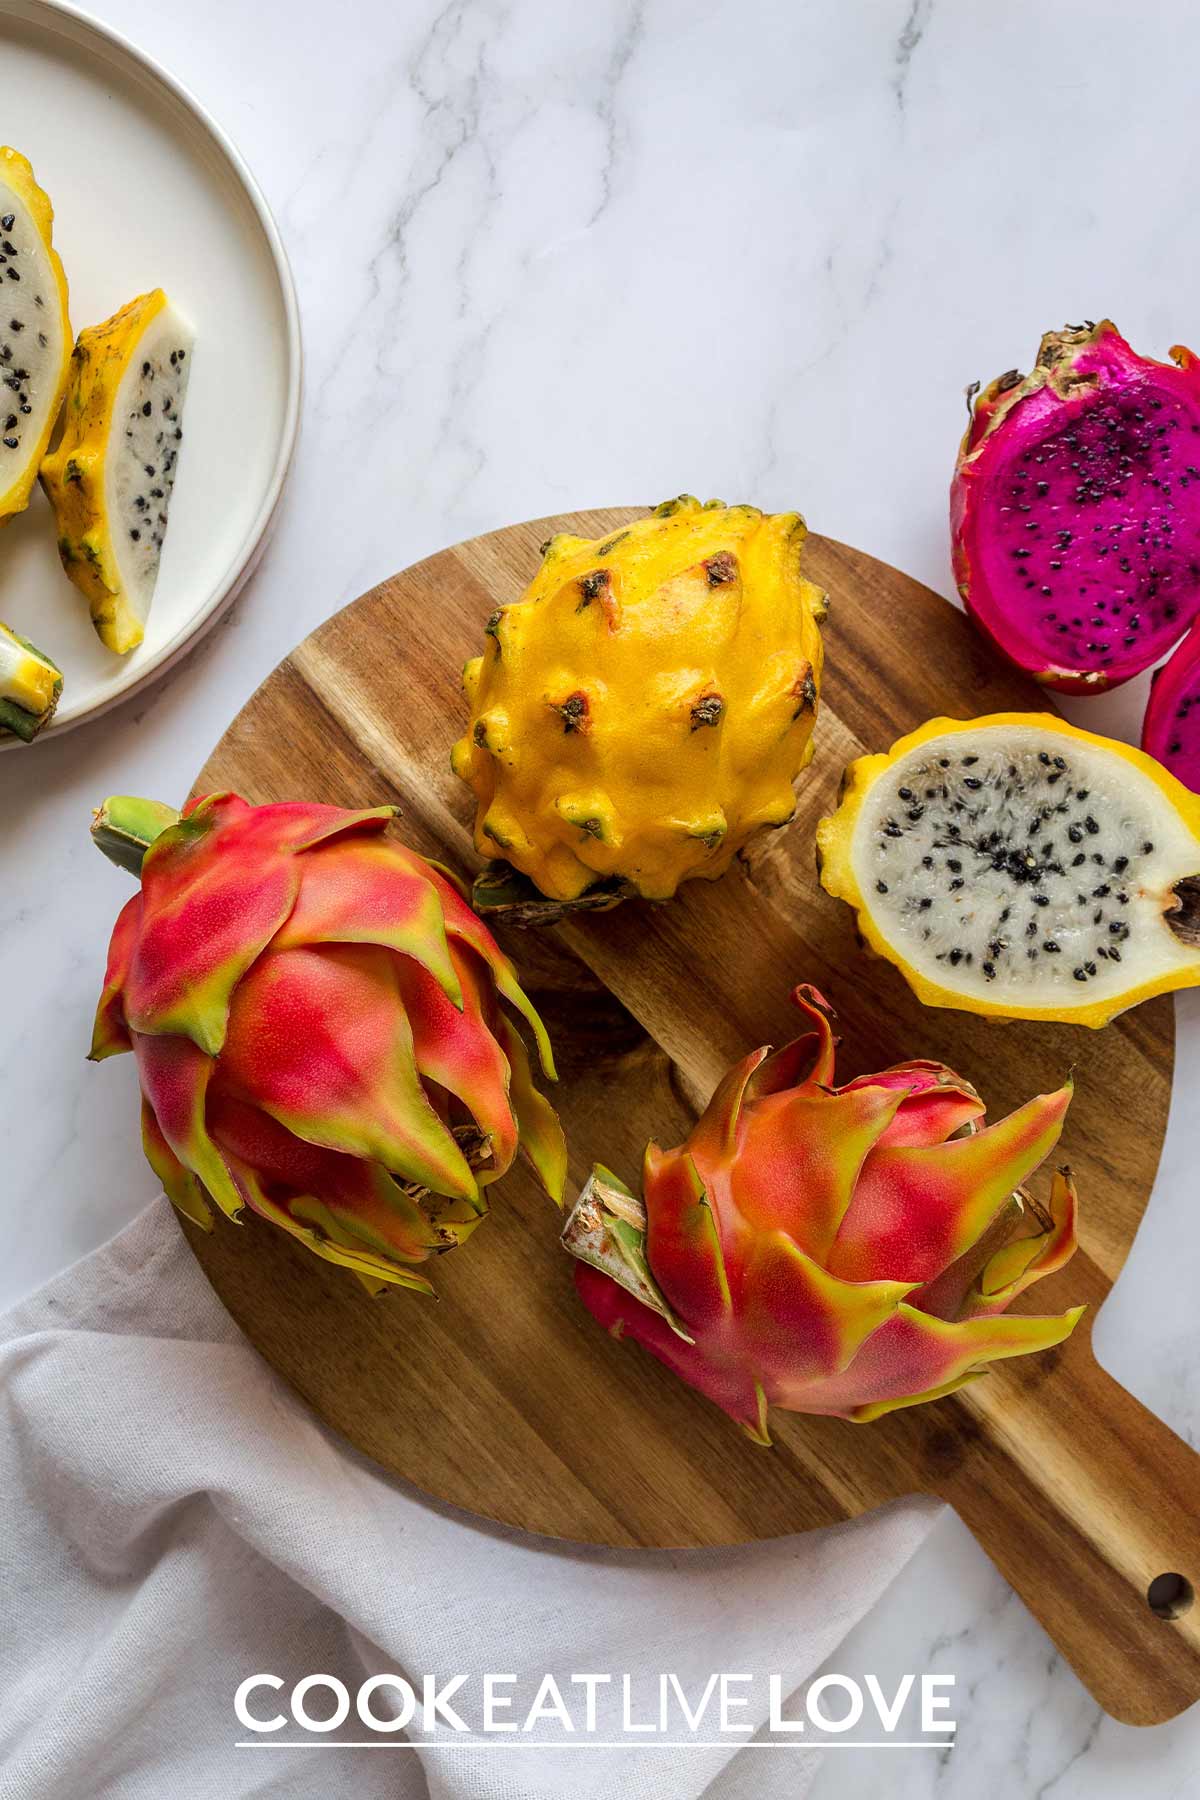 Red-pink dragon fruit and yellow variety on the table whole and cut in half.